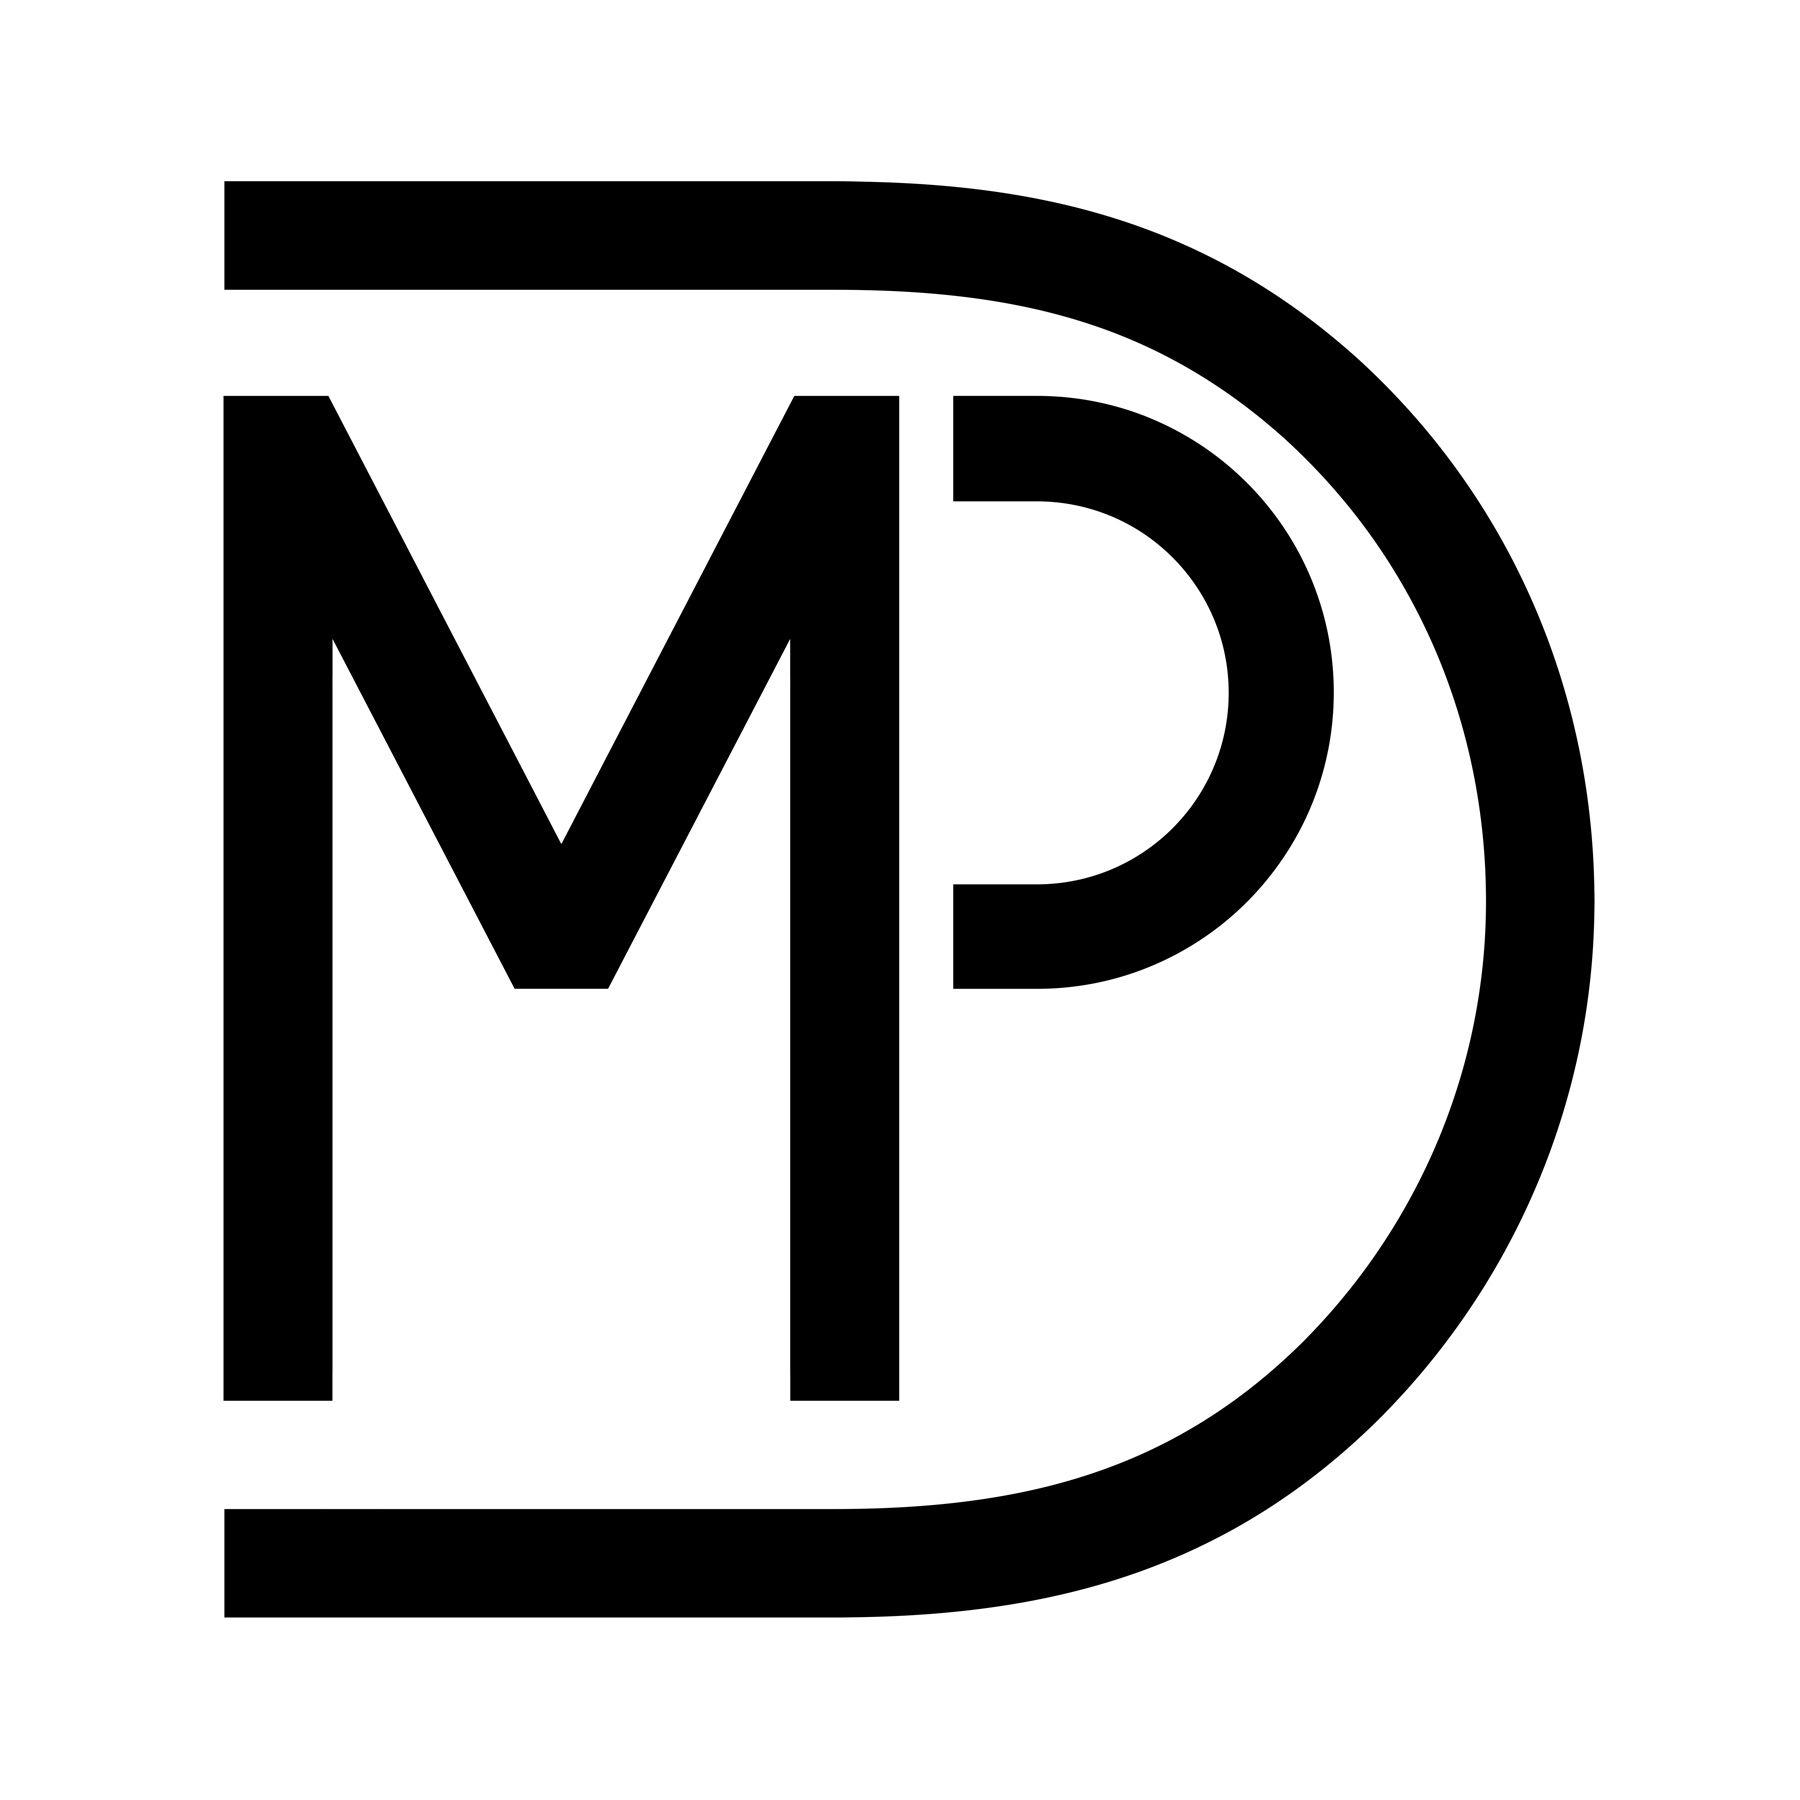 MPD Logo - A' Design Award and Competition Wine Rack Press Kit